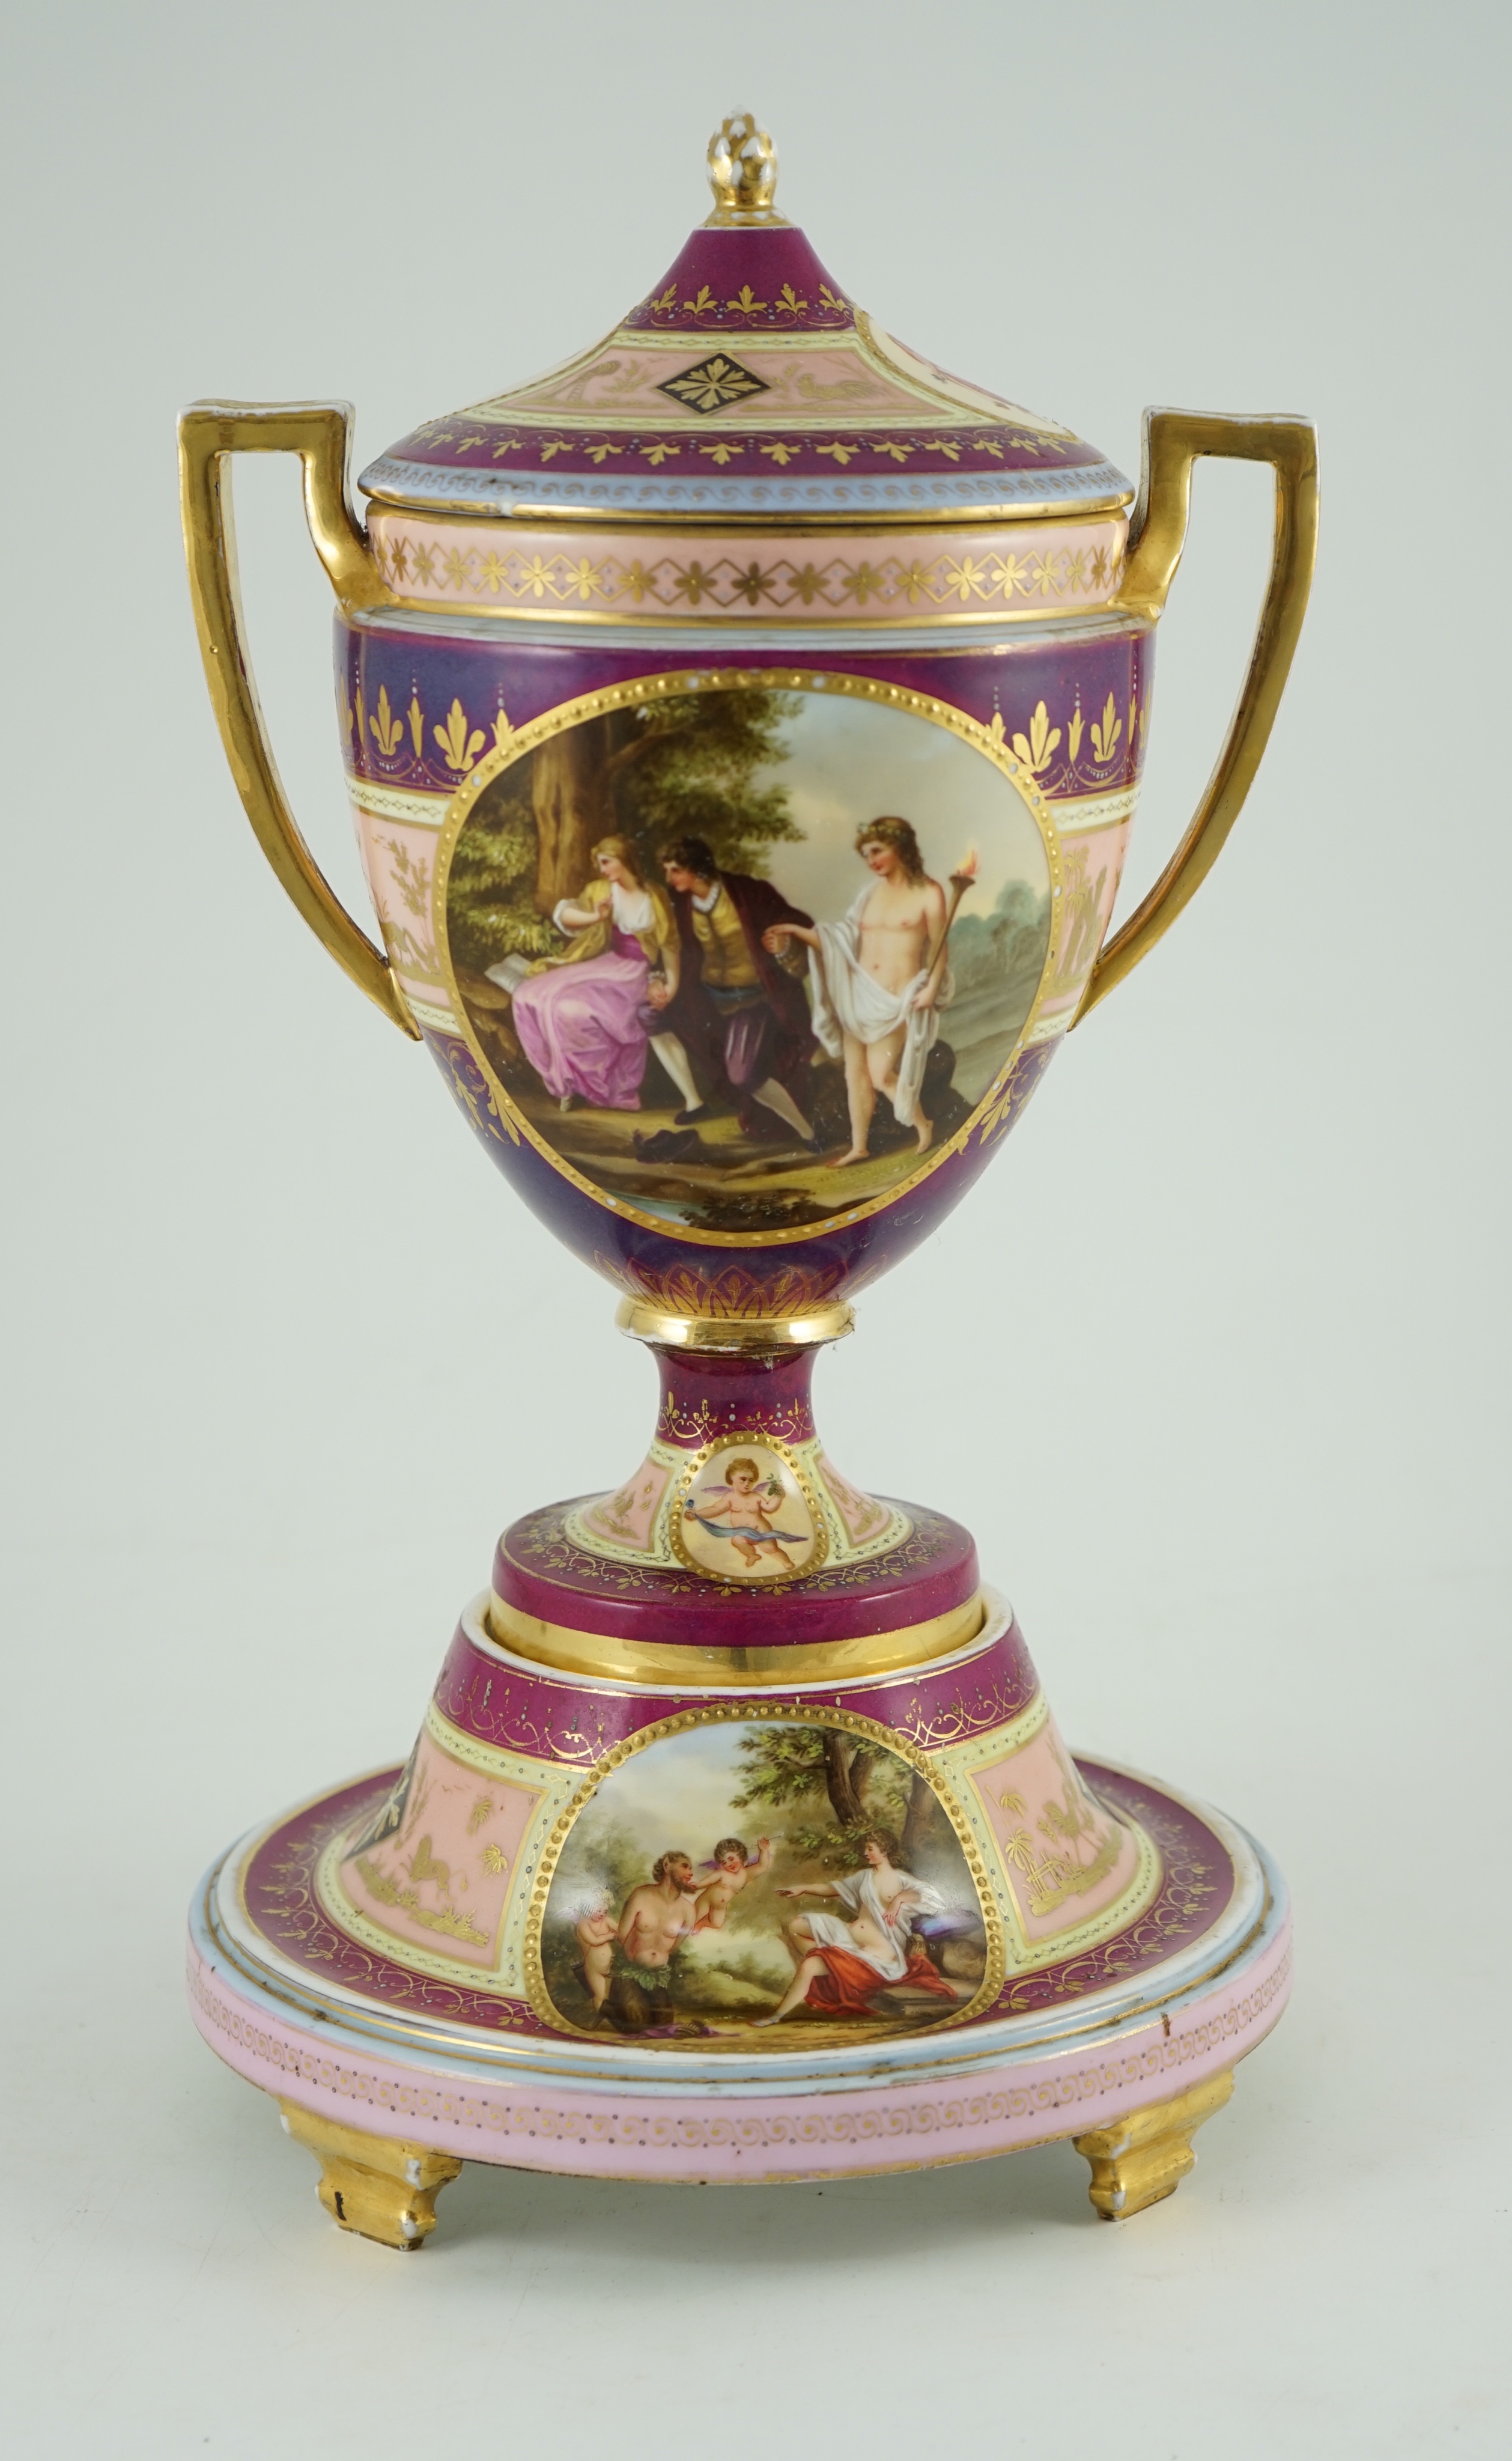 A Vienna style porcelain two handled cup, cover and stand, late 19th century, 42 cm high